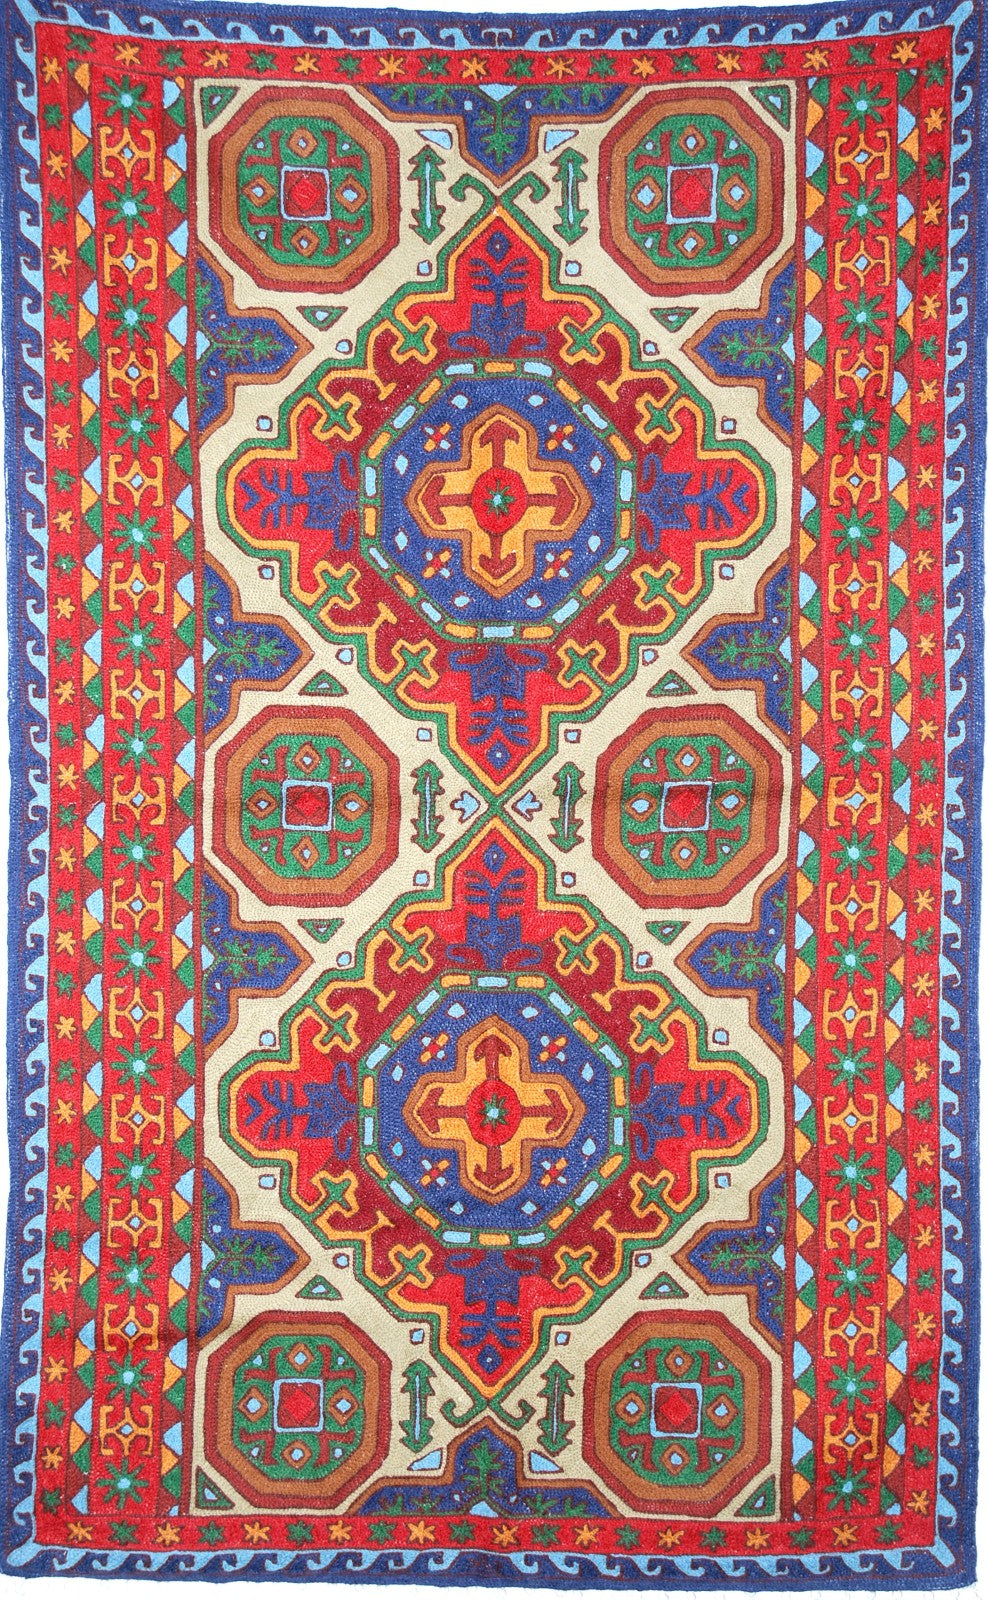 ChainStitch Tapestry Kilim Woolen Area Rug, Multicolor Embroidery 3x5 feet #CWR15122